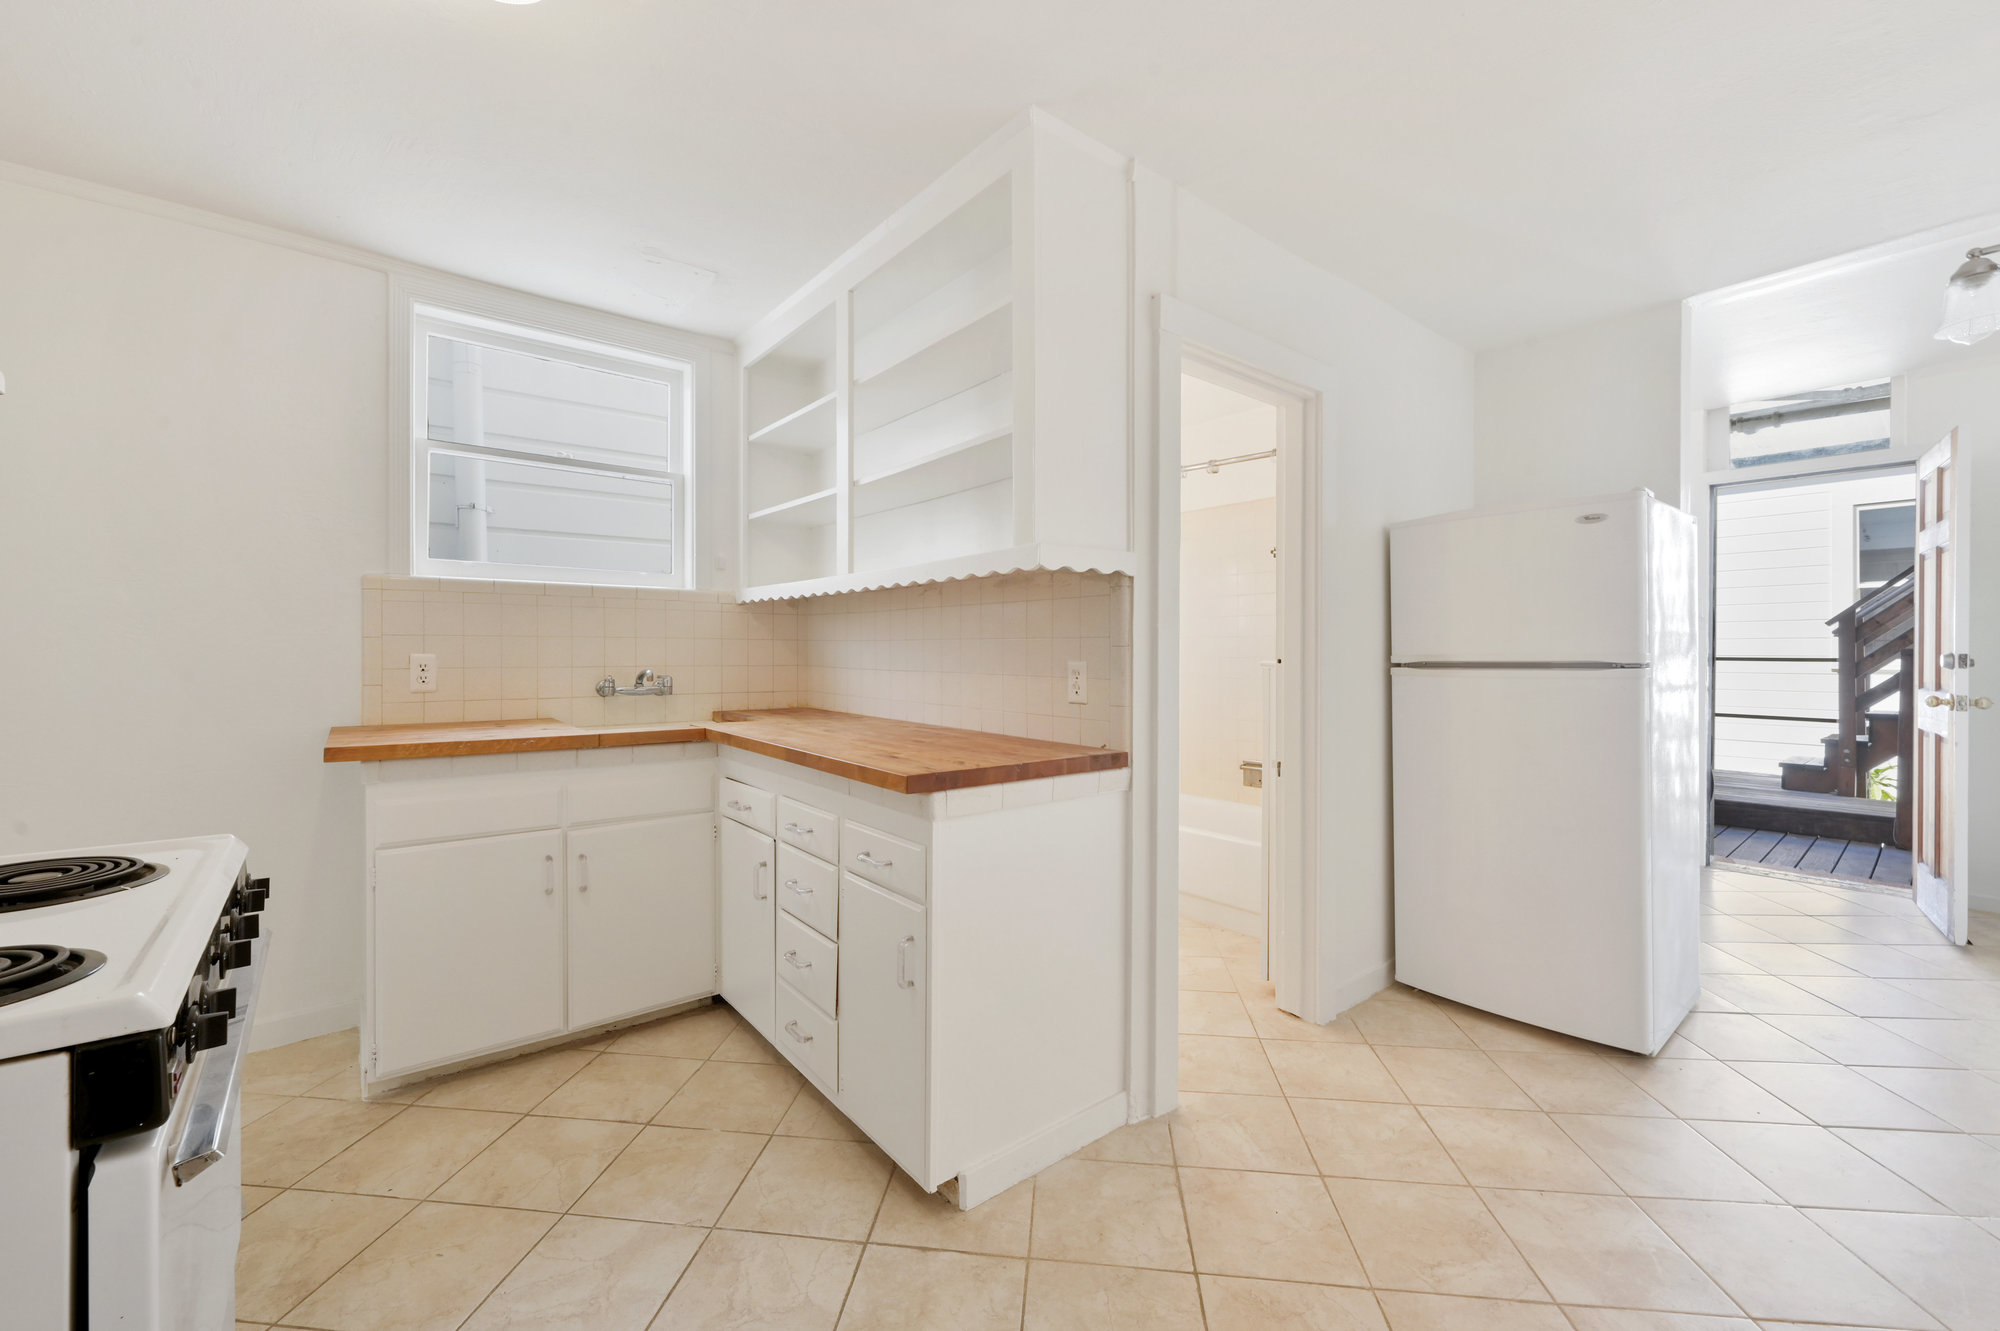 Property Photo: Kitchen, featuring white cabinets